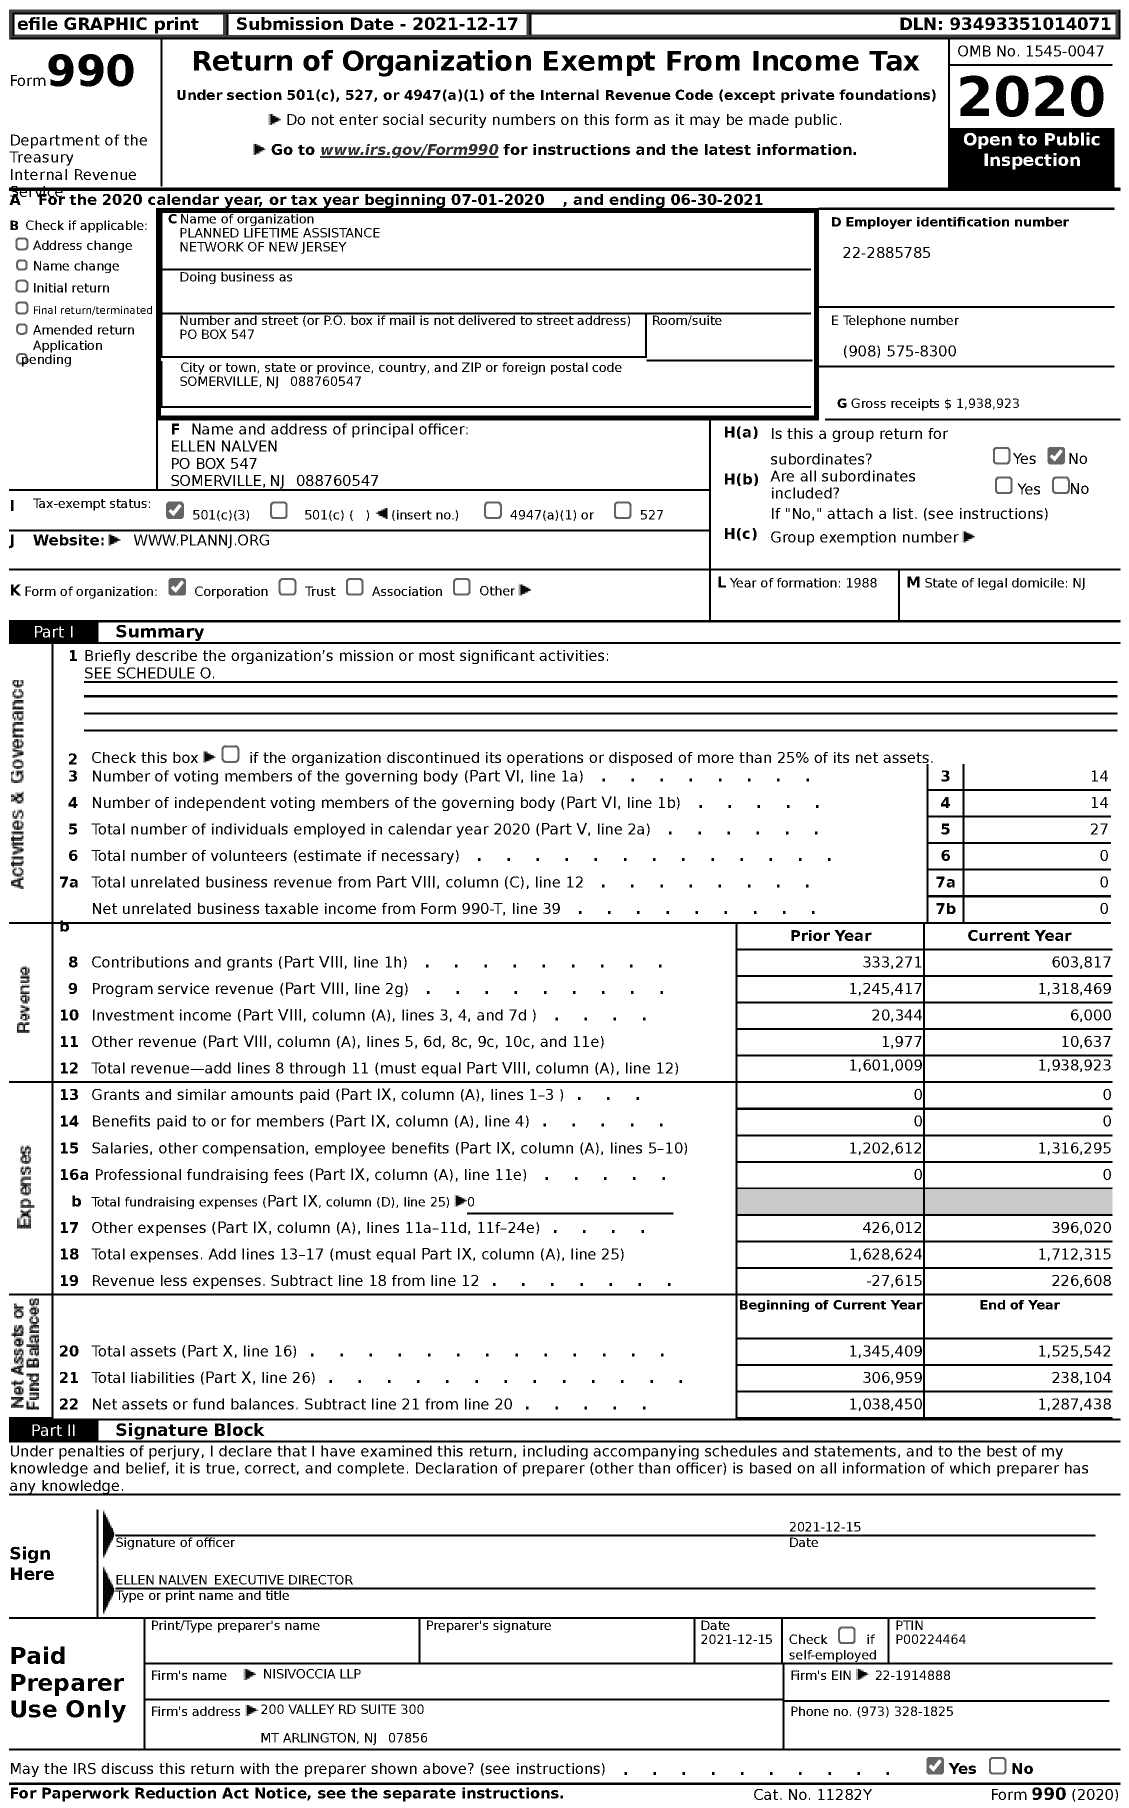 Image of first page of 2020 Form 990 for Planned Lifetime Assistance Network of New Jersey